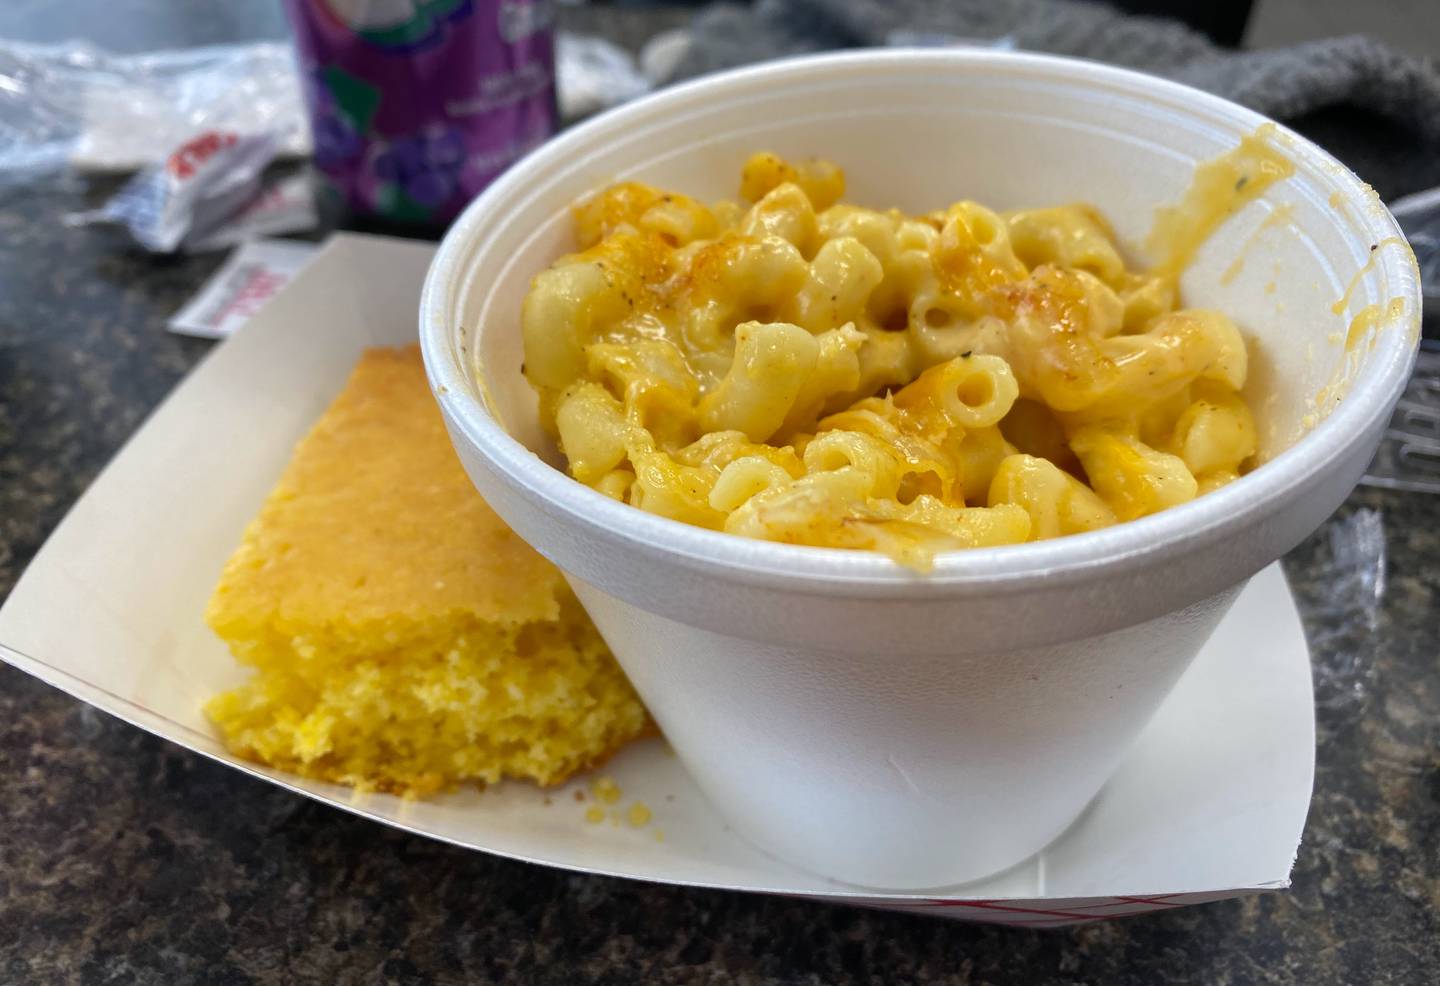 During our visit to Tangie's Kitchen, we ordered cornbread and baked macaroni and cheese as sides, both were highlights of the meal.